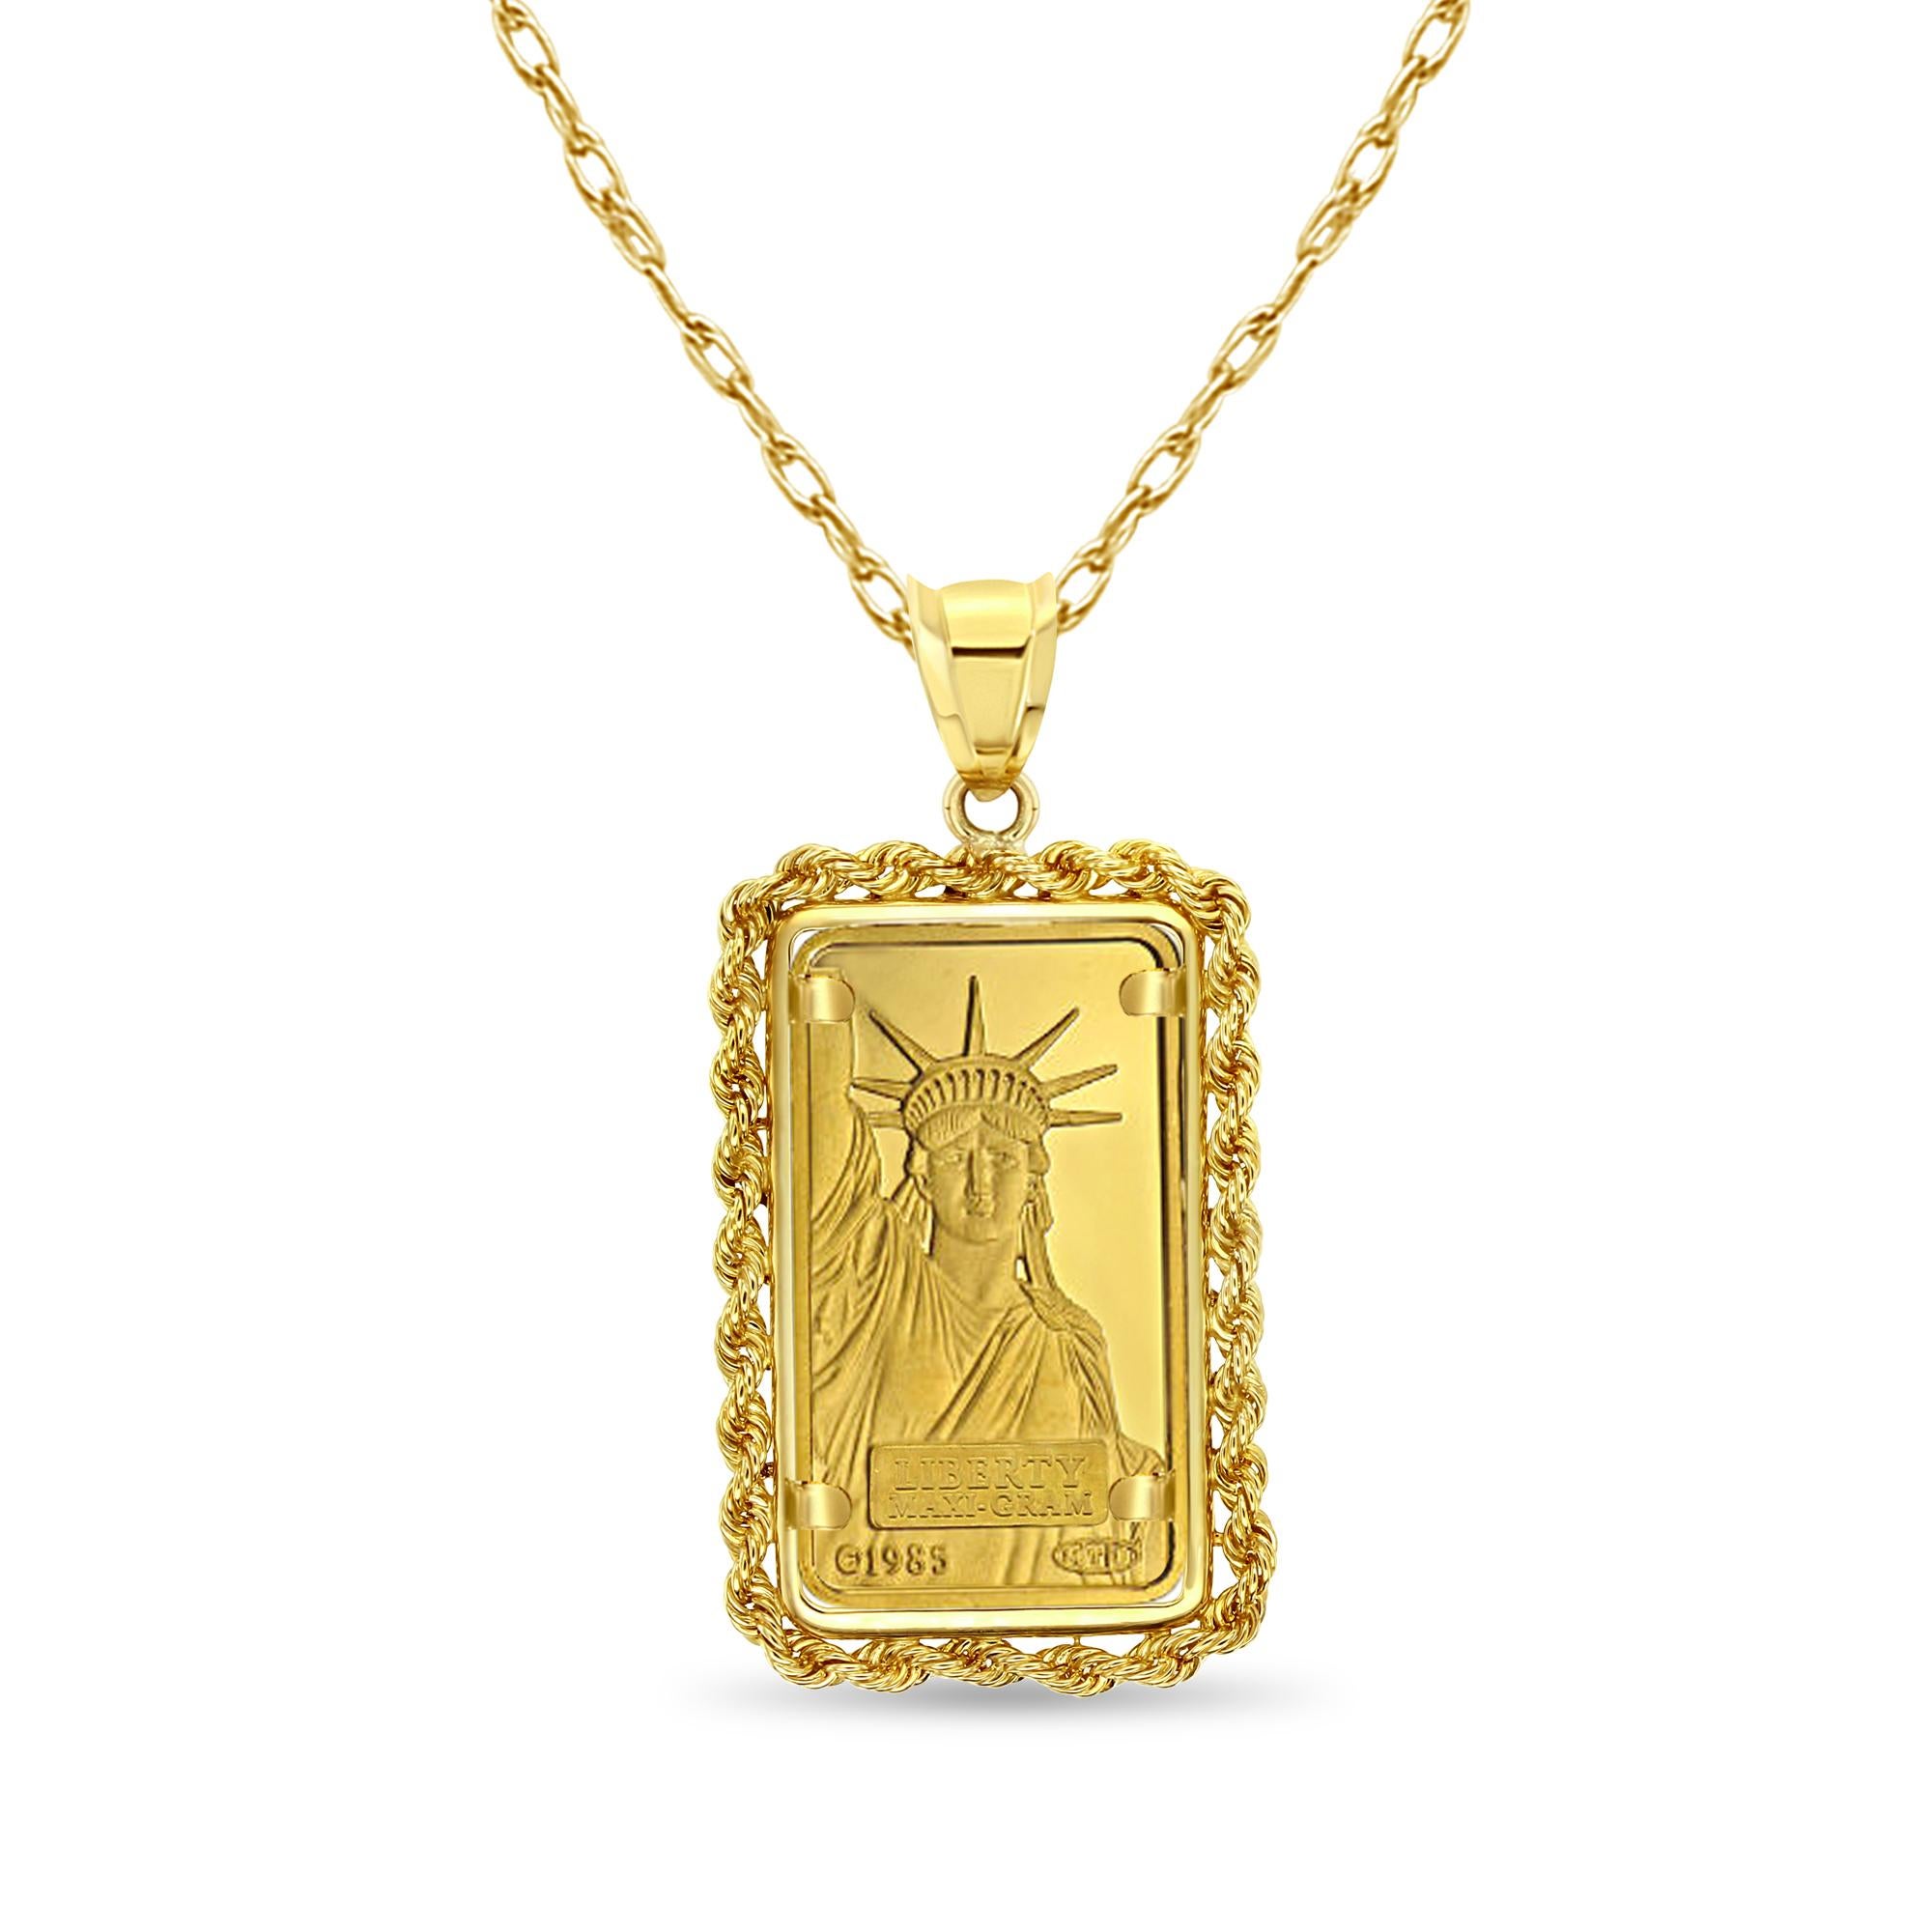 **MADE TO ORDER**

♥ Coin Information ♥

Country: Switzerland
Details: 5 Gram Credit Suisse Gold Bar
Purity: 999.9
Metal Weight: 0.1607 troy oz
Obverse: Credit Suisse logo, weight, metal content and purity
Reverse: Image of the Statue of Liberty,